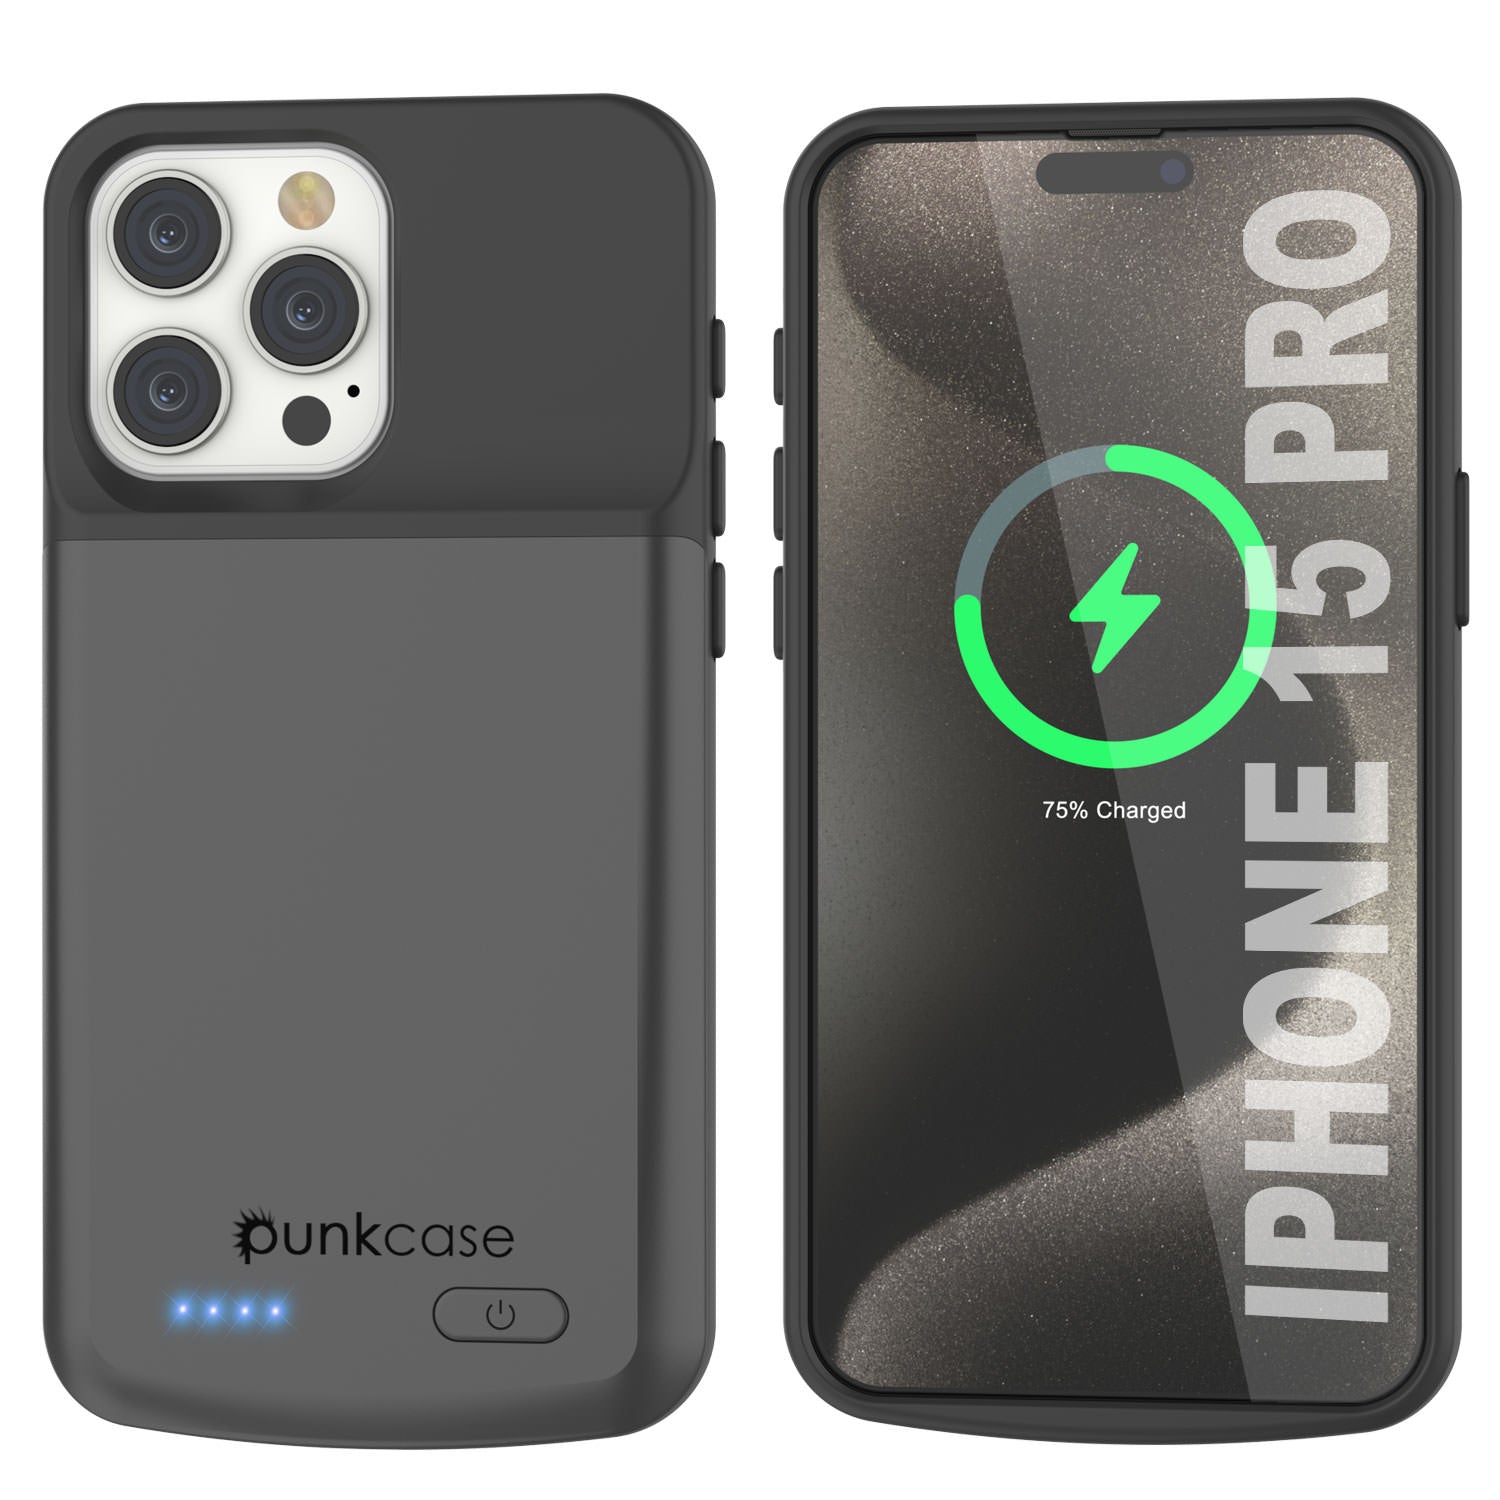 iPhone 15 Pro Battery Case, PunkJuice 5000mAH Fast Charging Power Bank W/ Screen Protector | [Grey]